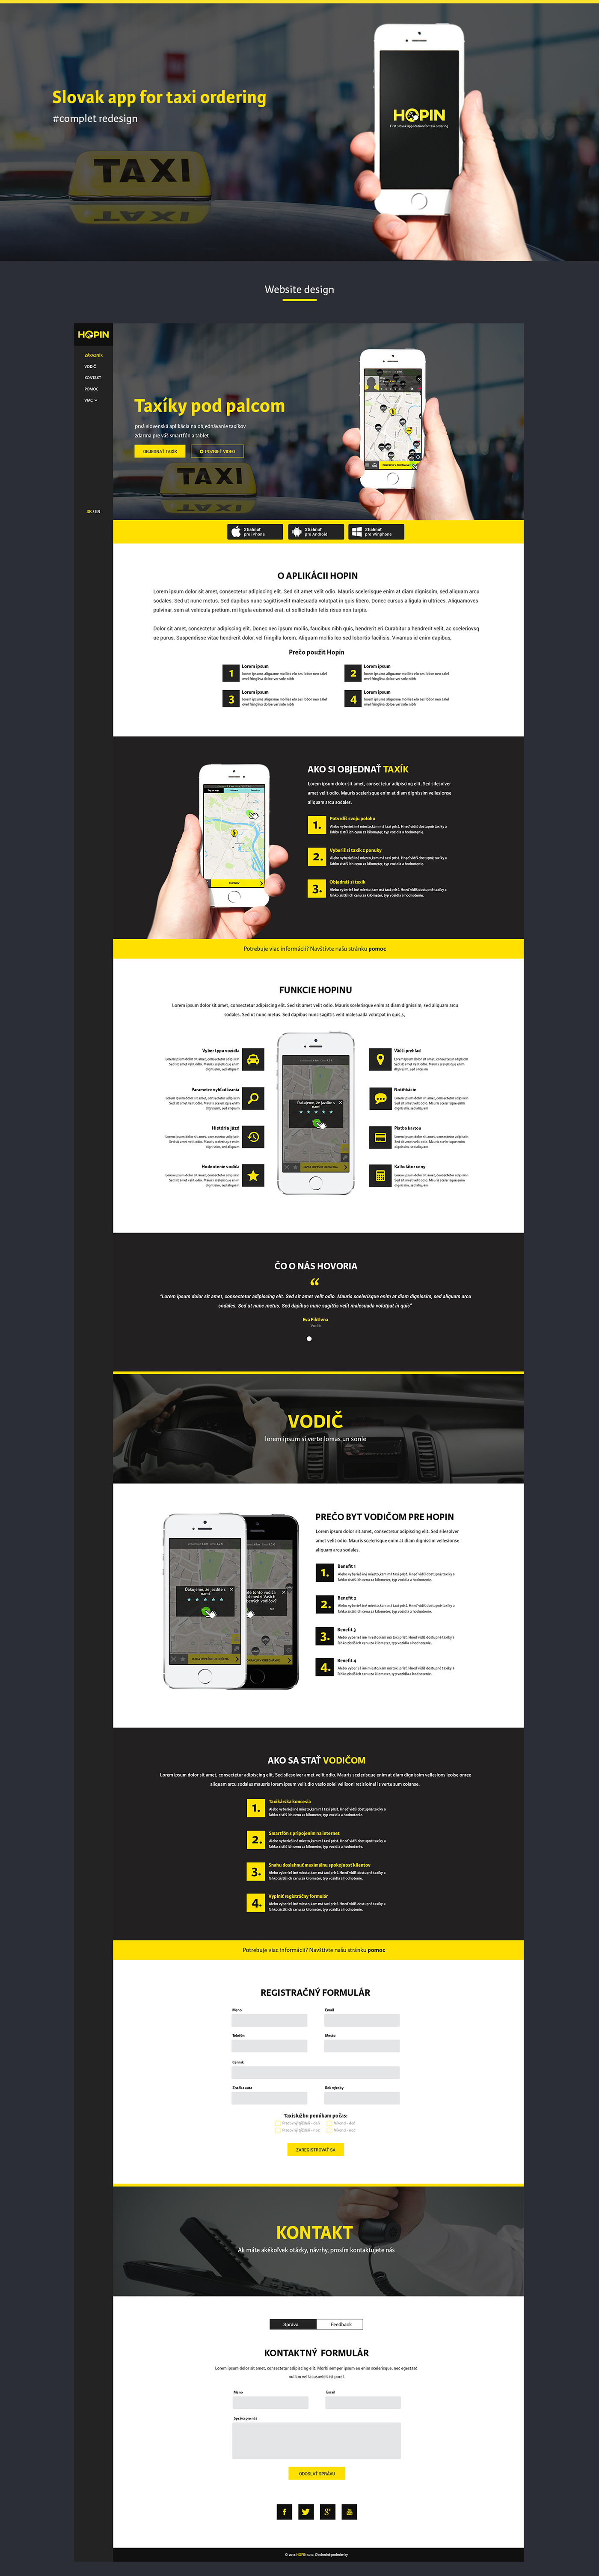 Website redesign UI taxi mobile application